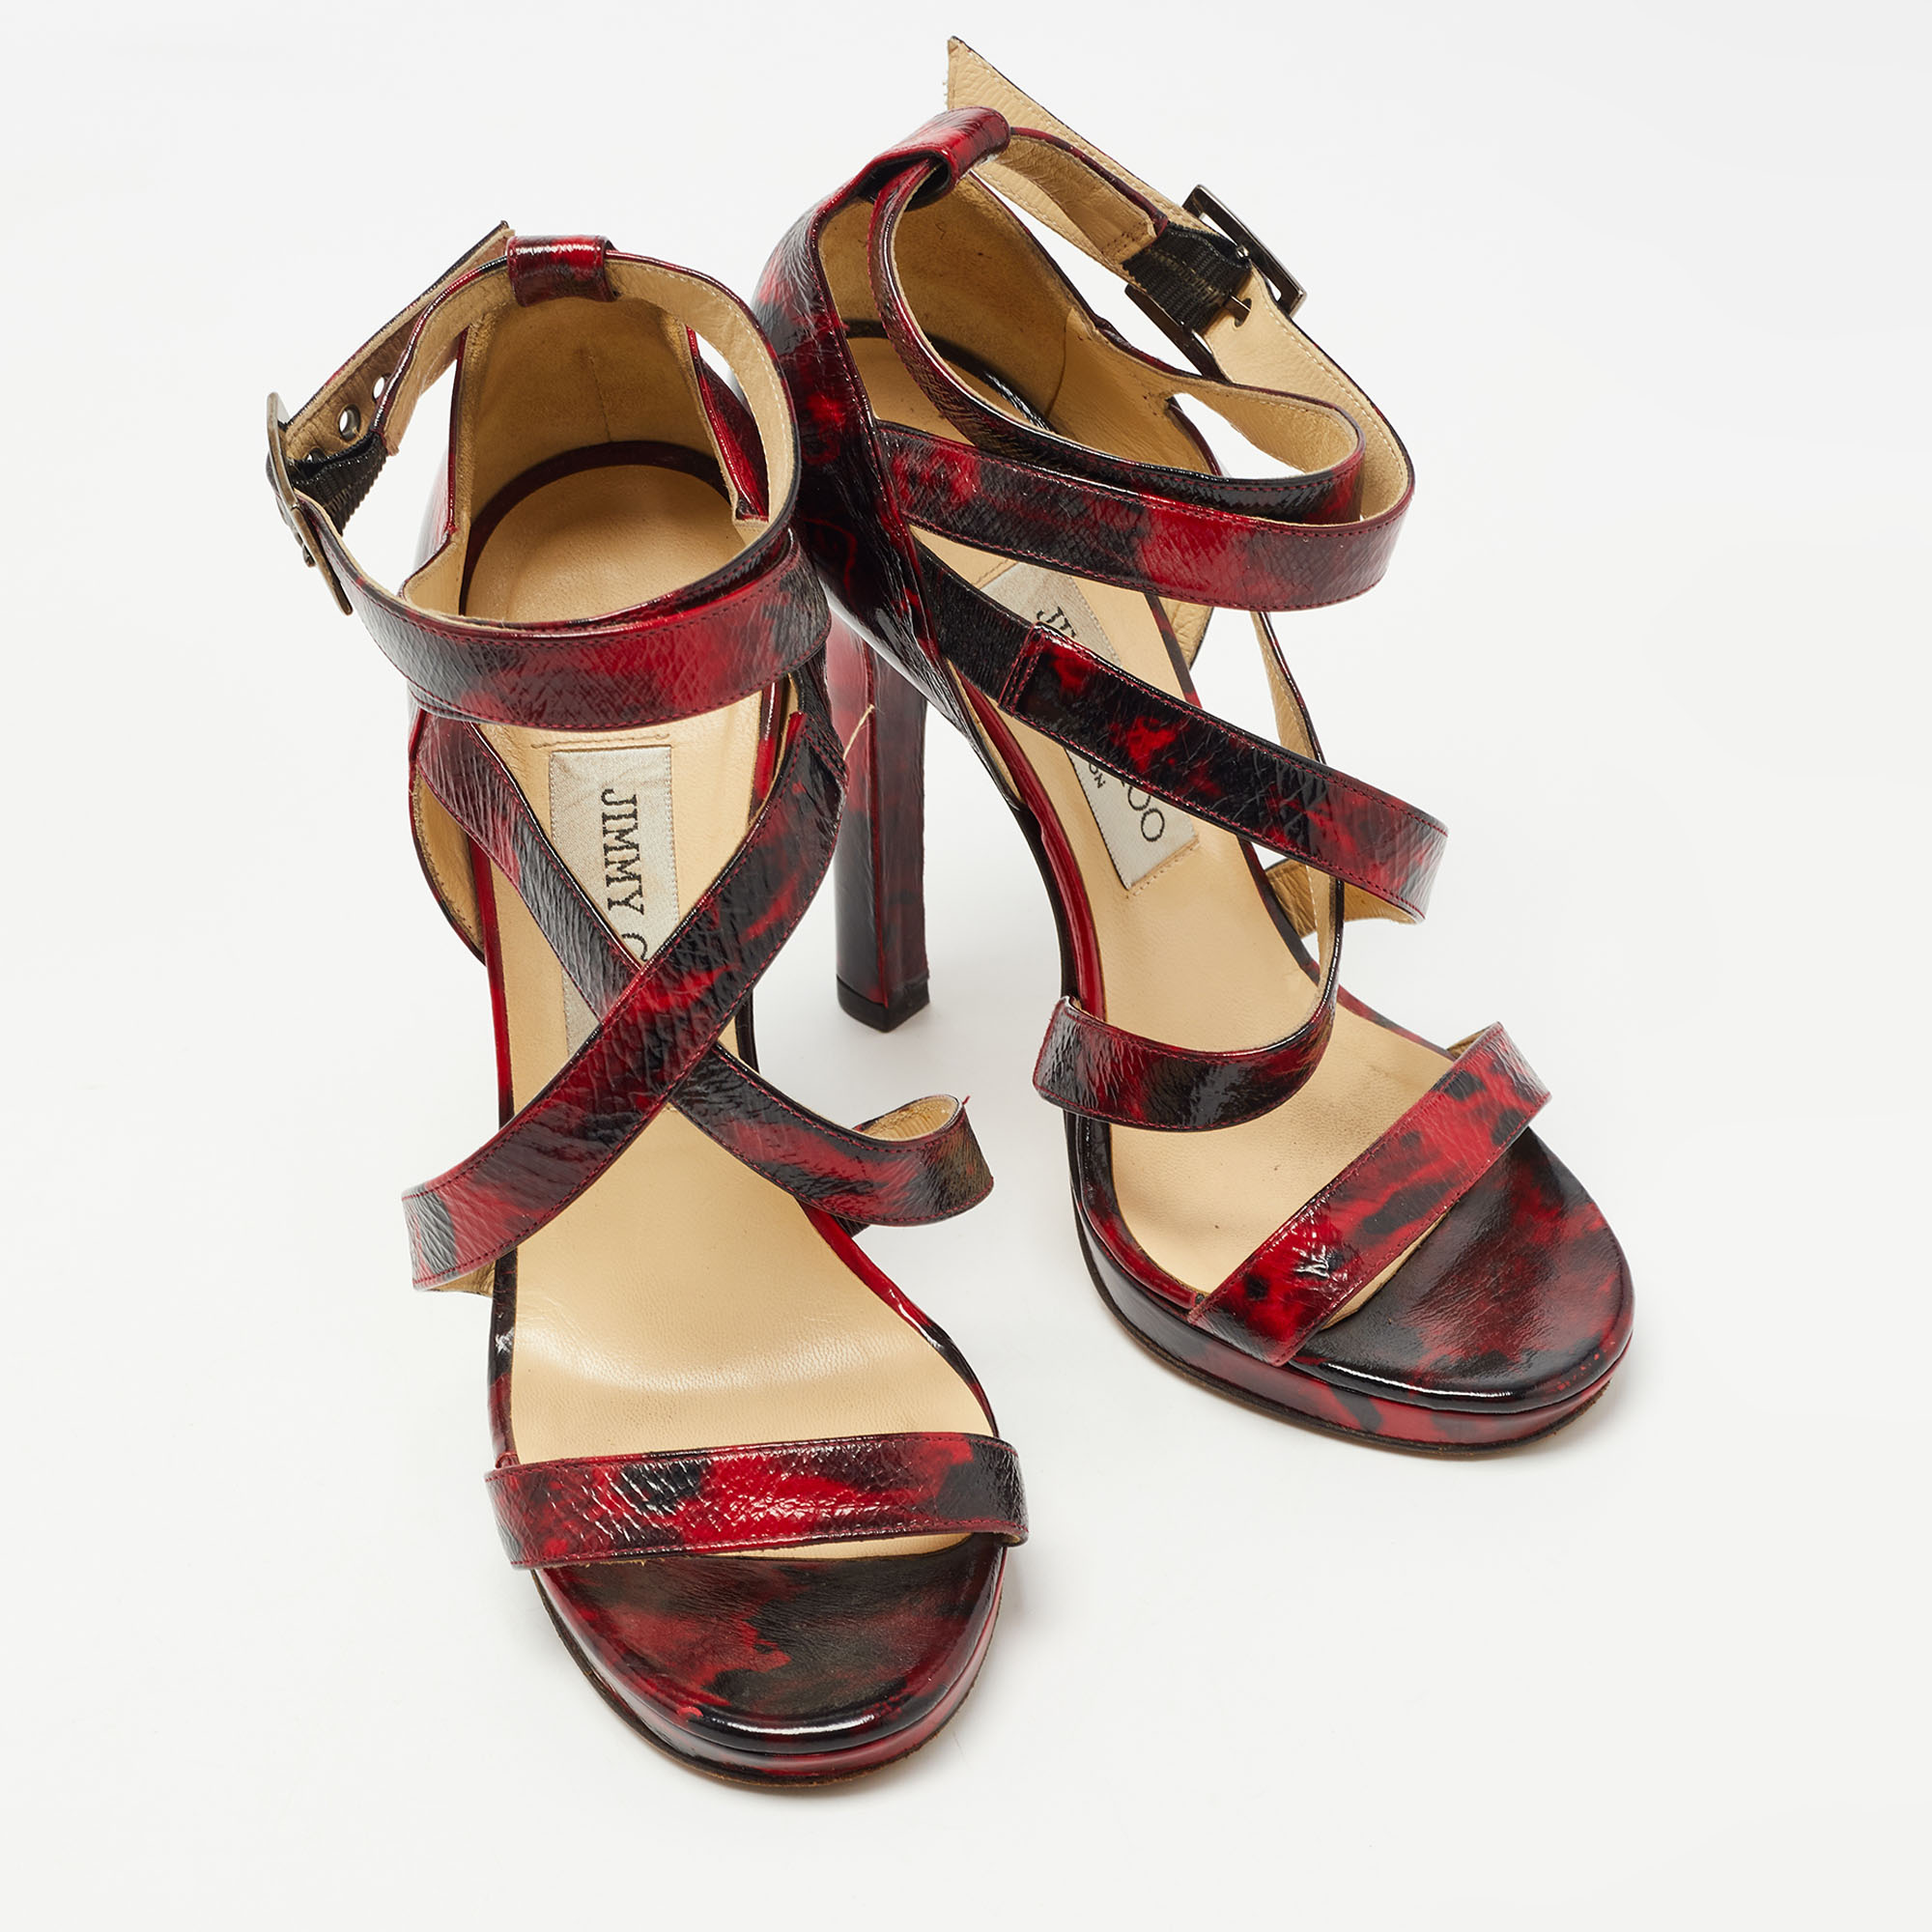 Jimmy Choo Red/Black Leather Double Cross Strap Sandals Size 36